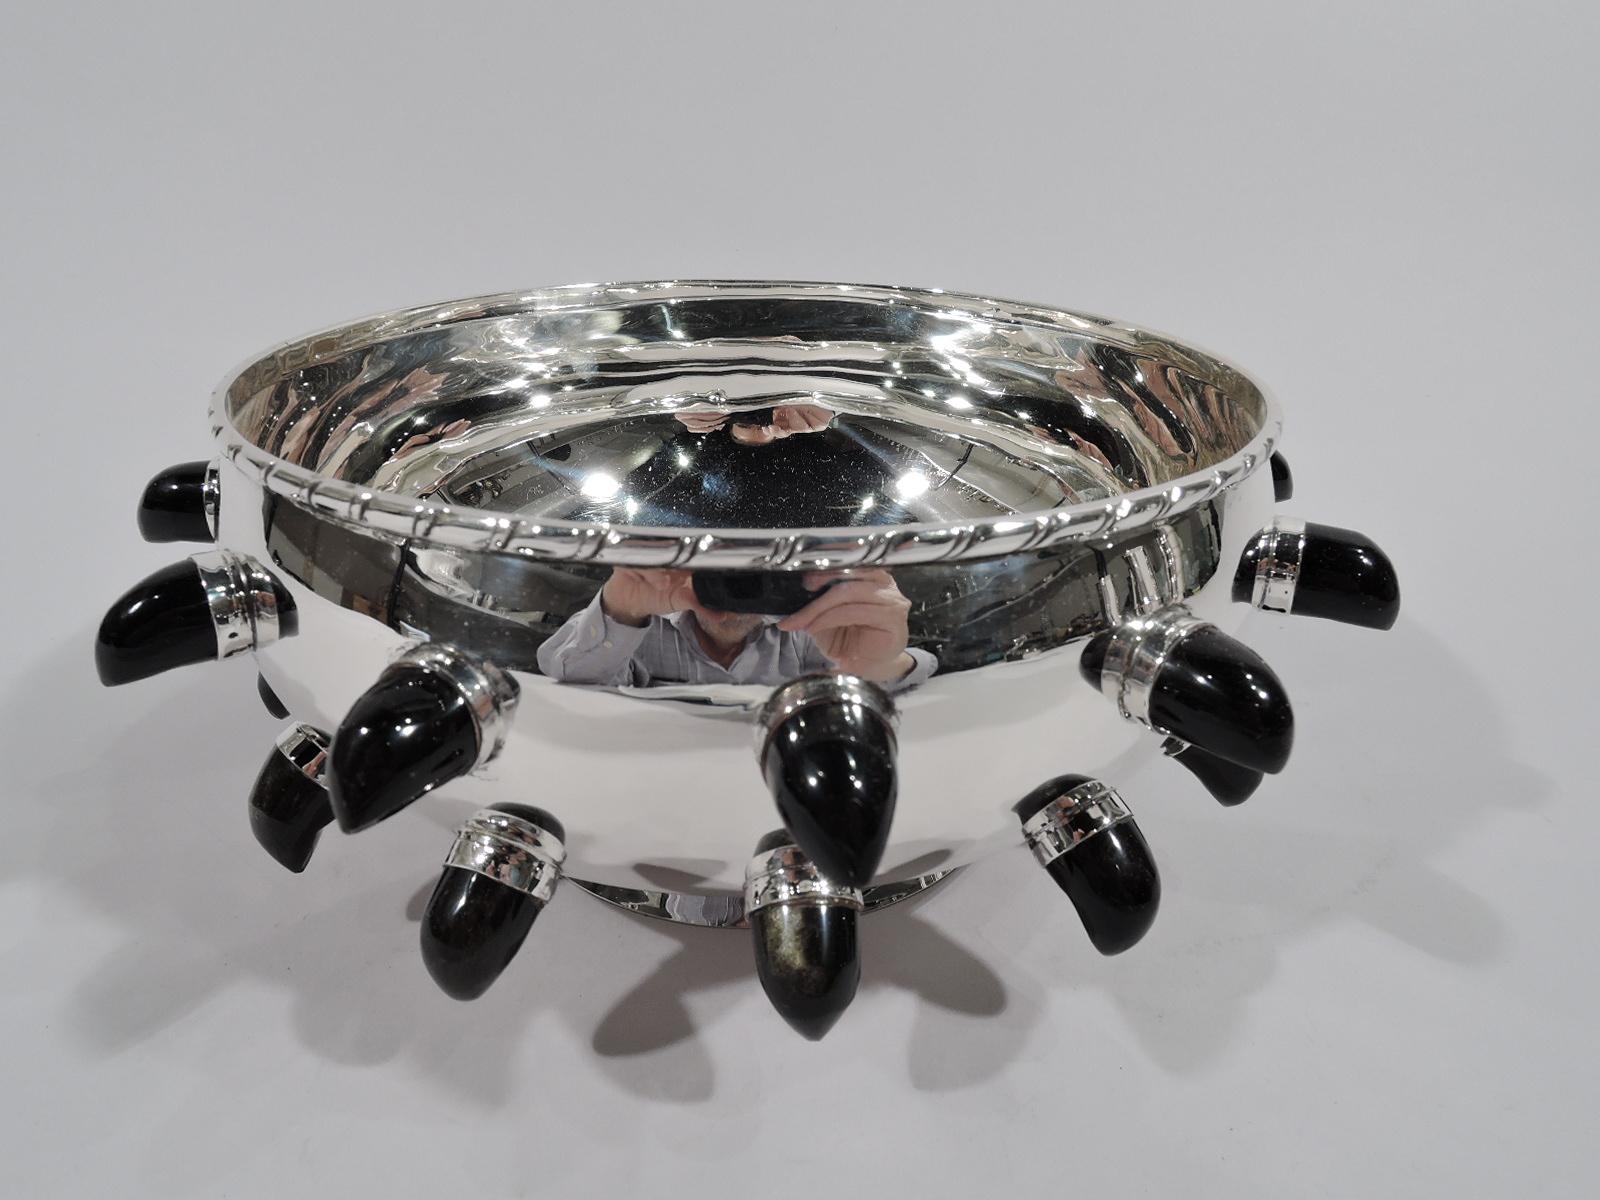 Mid-Century Modern sterling silver and obsidian bowl. Made by Tane in Mexico City. Curved bowl on short spread foot. Rim has tooled scoring. On exterior are obsidian “teardrops” sterling silver mounts. Fully marked including maker’s stamp and no. 71